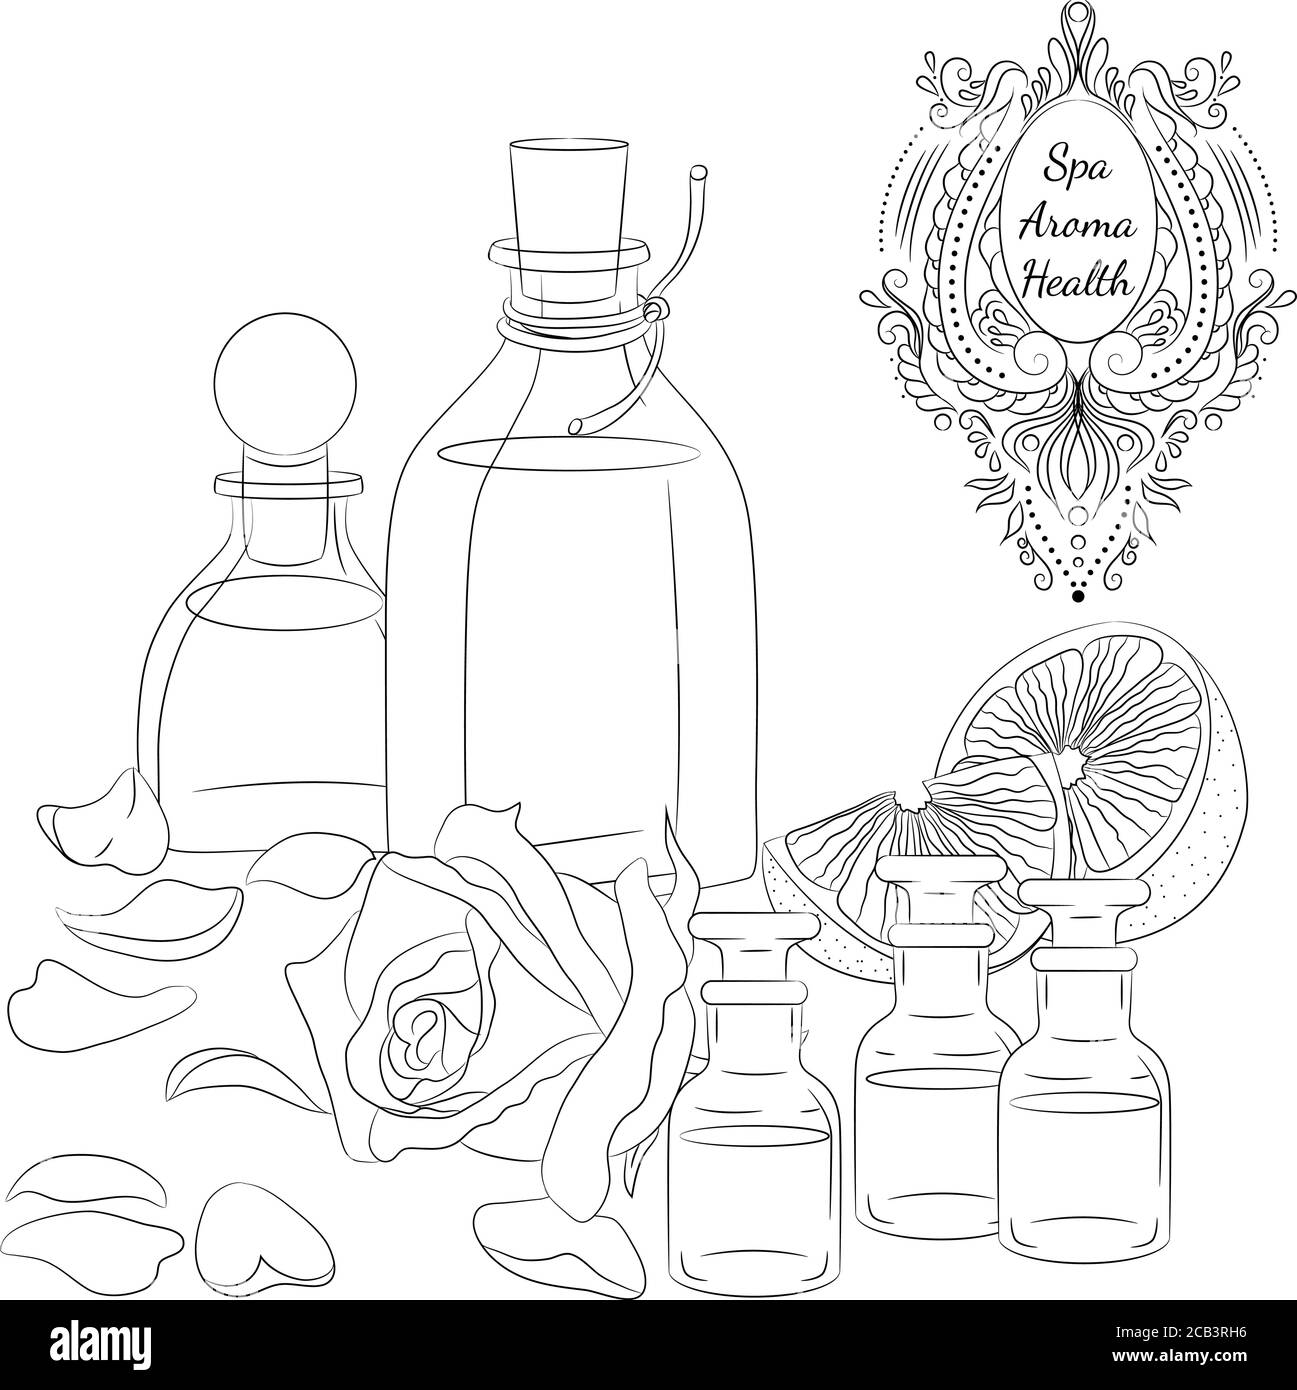 Vector illustration with aroma oils and oils for spa massage. Line art isolated on white background. Design for a spa, massage and beauty salon, organic health care products Stock Vector